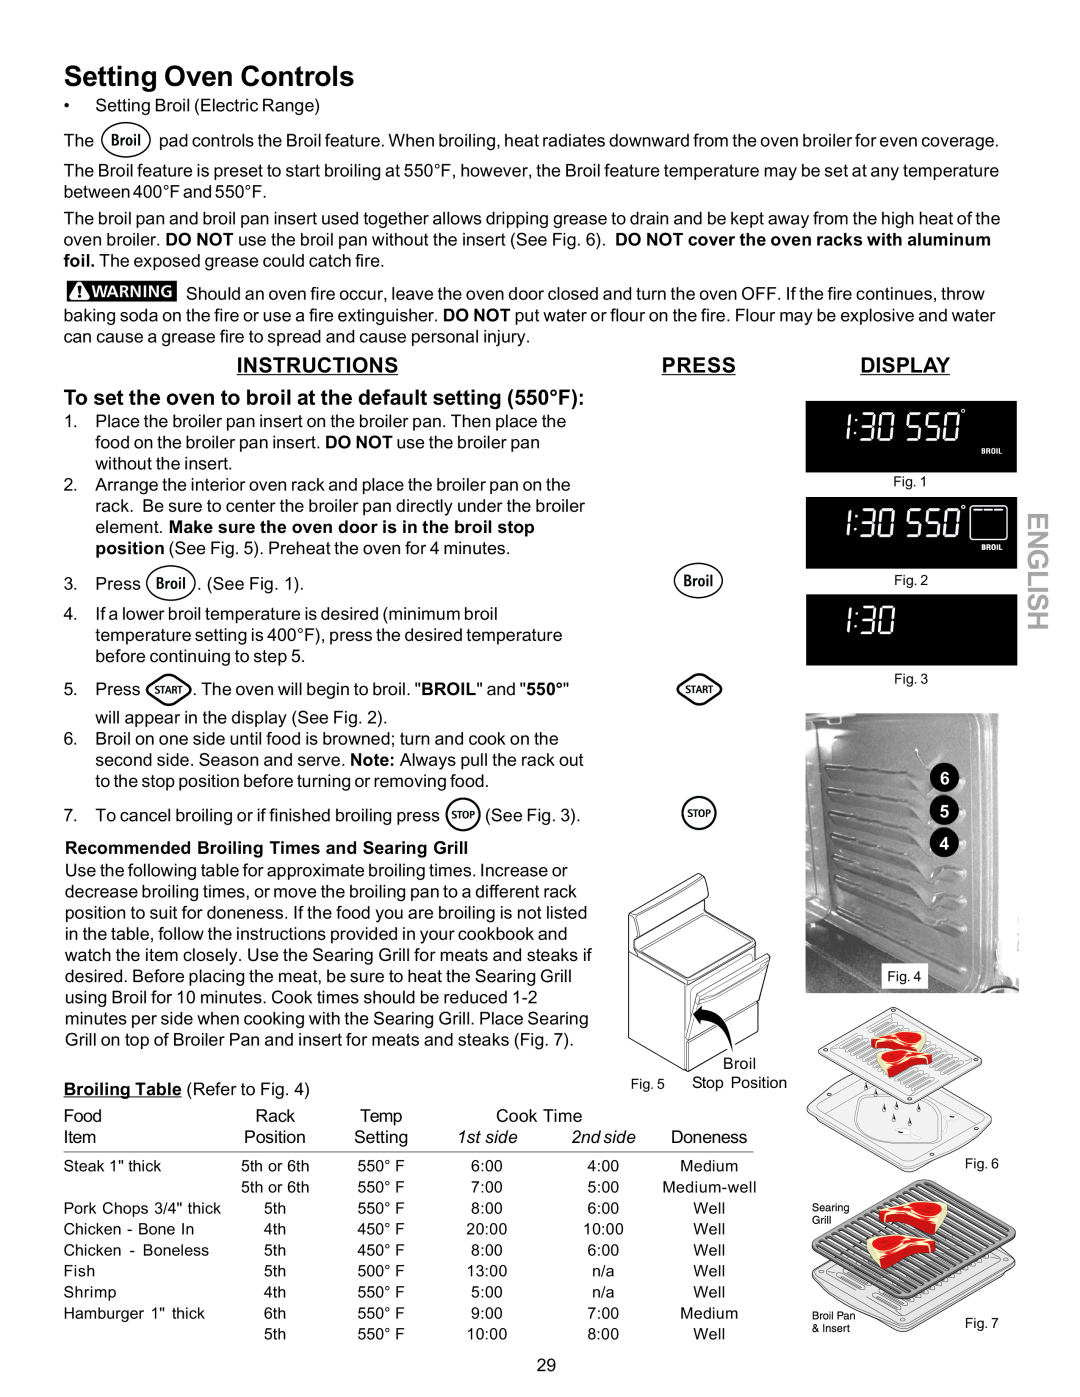 Kenmore 790-9663 manual To set the oven to broil at the default setting 550F, Recommended Broiling Times and Searing Grill 